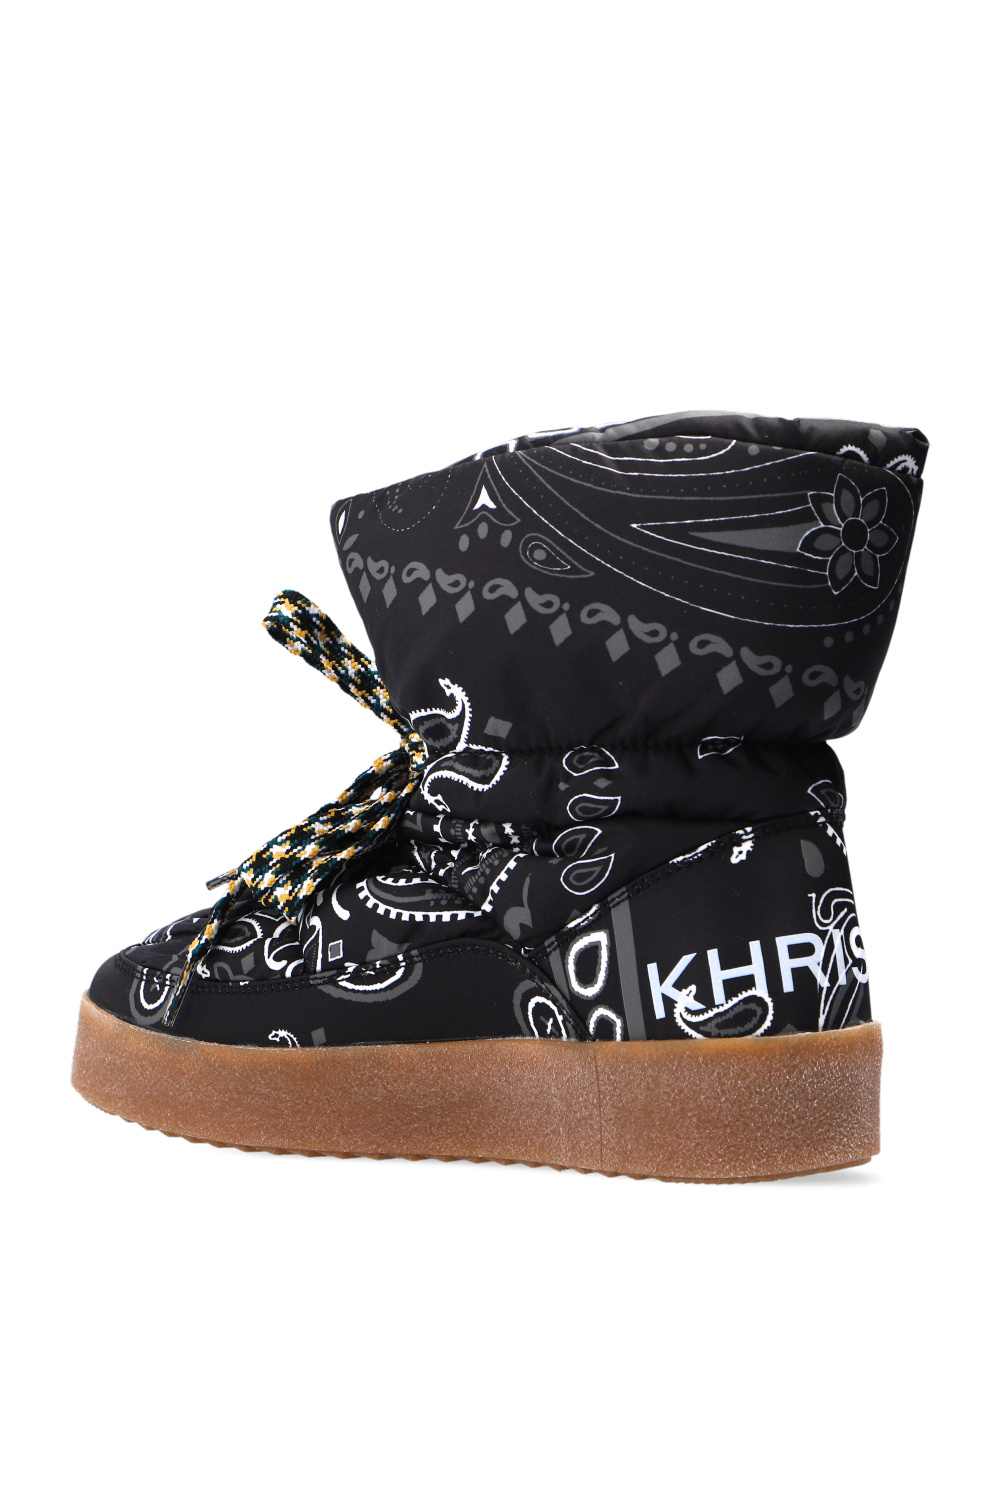 Khrisjoy Compliment any casual or formal look wearing ® Stormy Boots